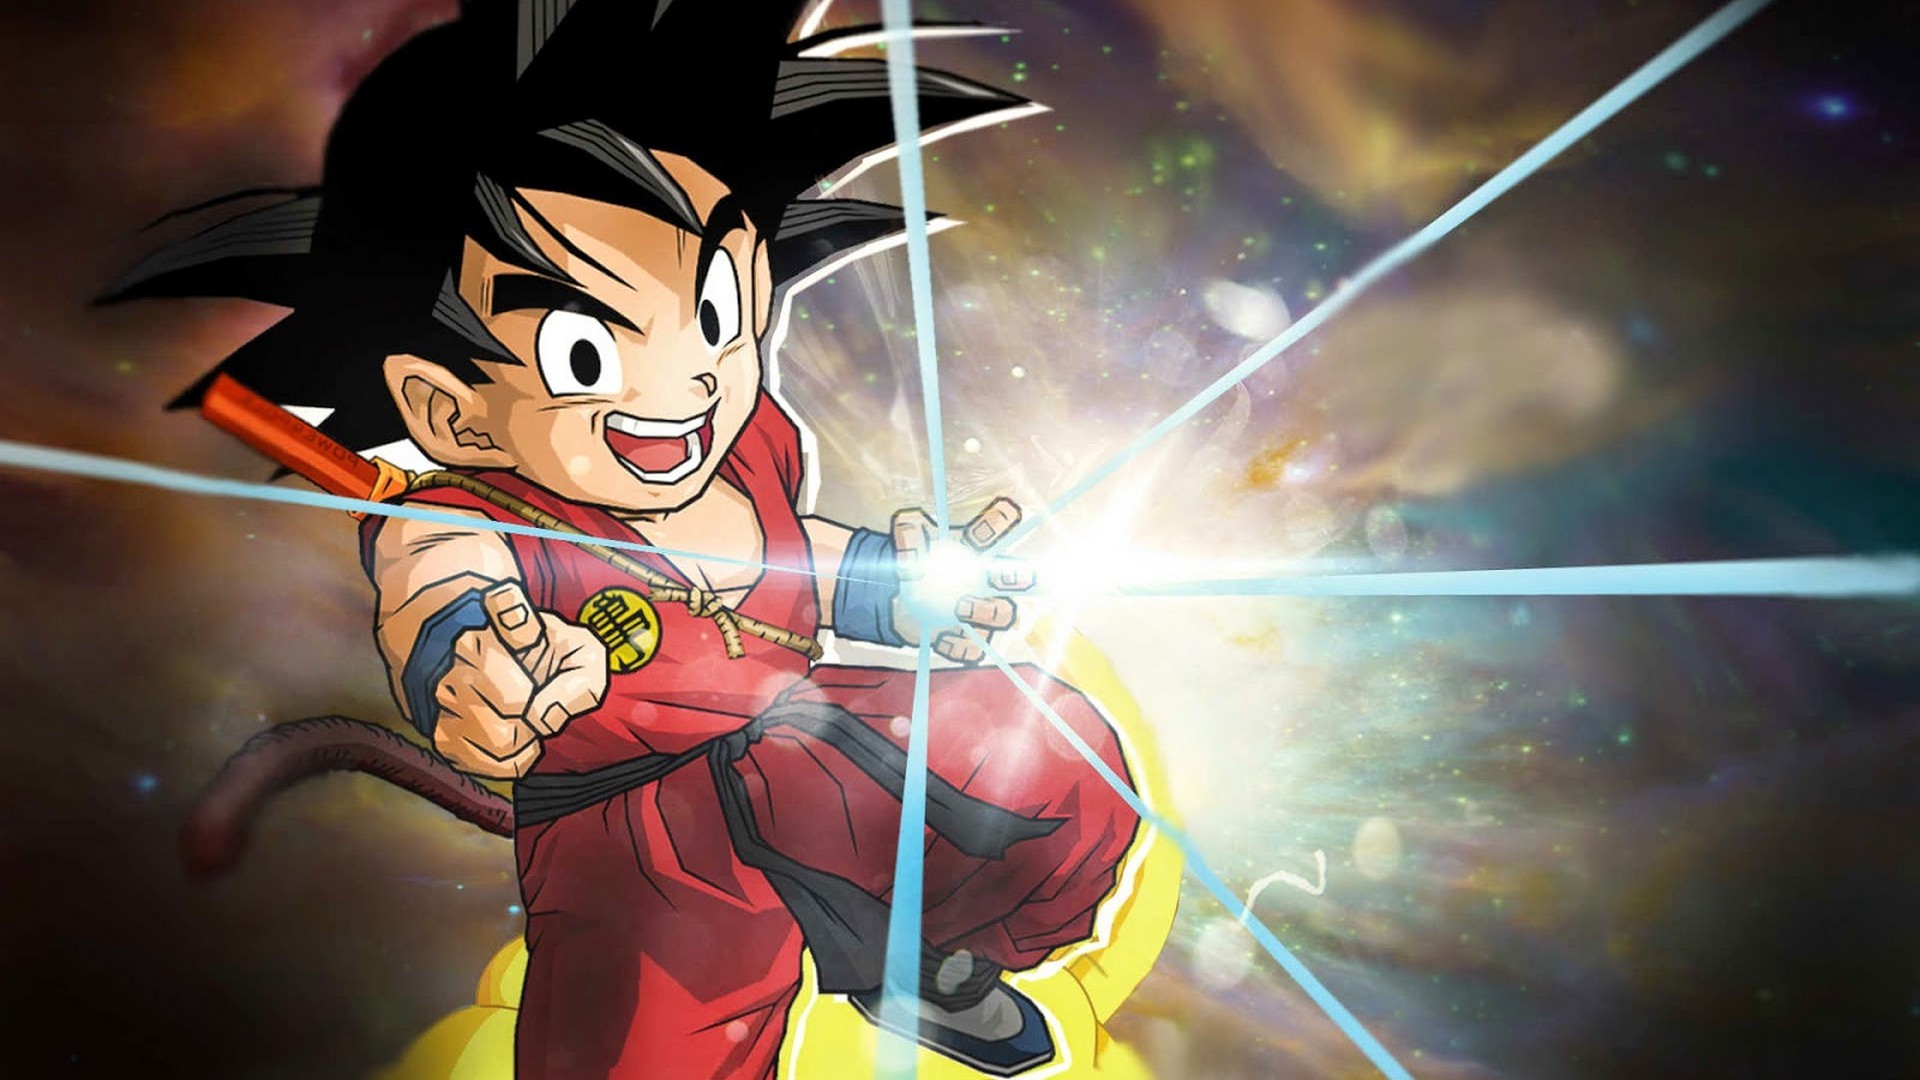 Kid Goku Wallpaper with image resolution 1920x1080 pixel. You can use this wallpaper as background for your desktop Computer Screensavers, Android or iPhone smartphones